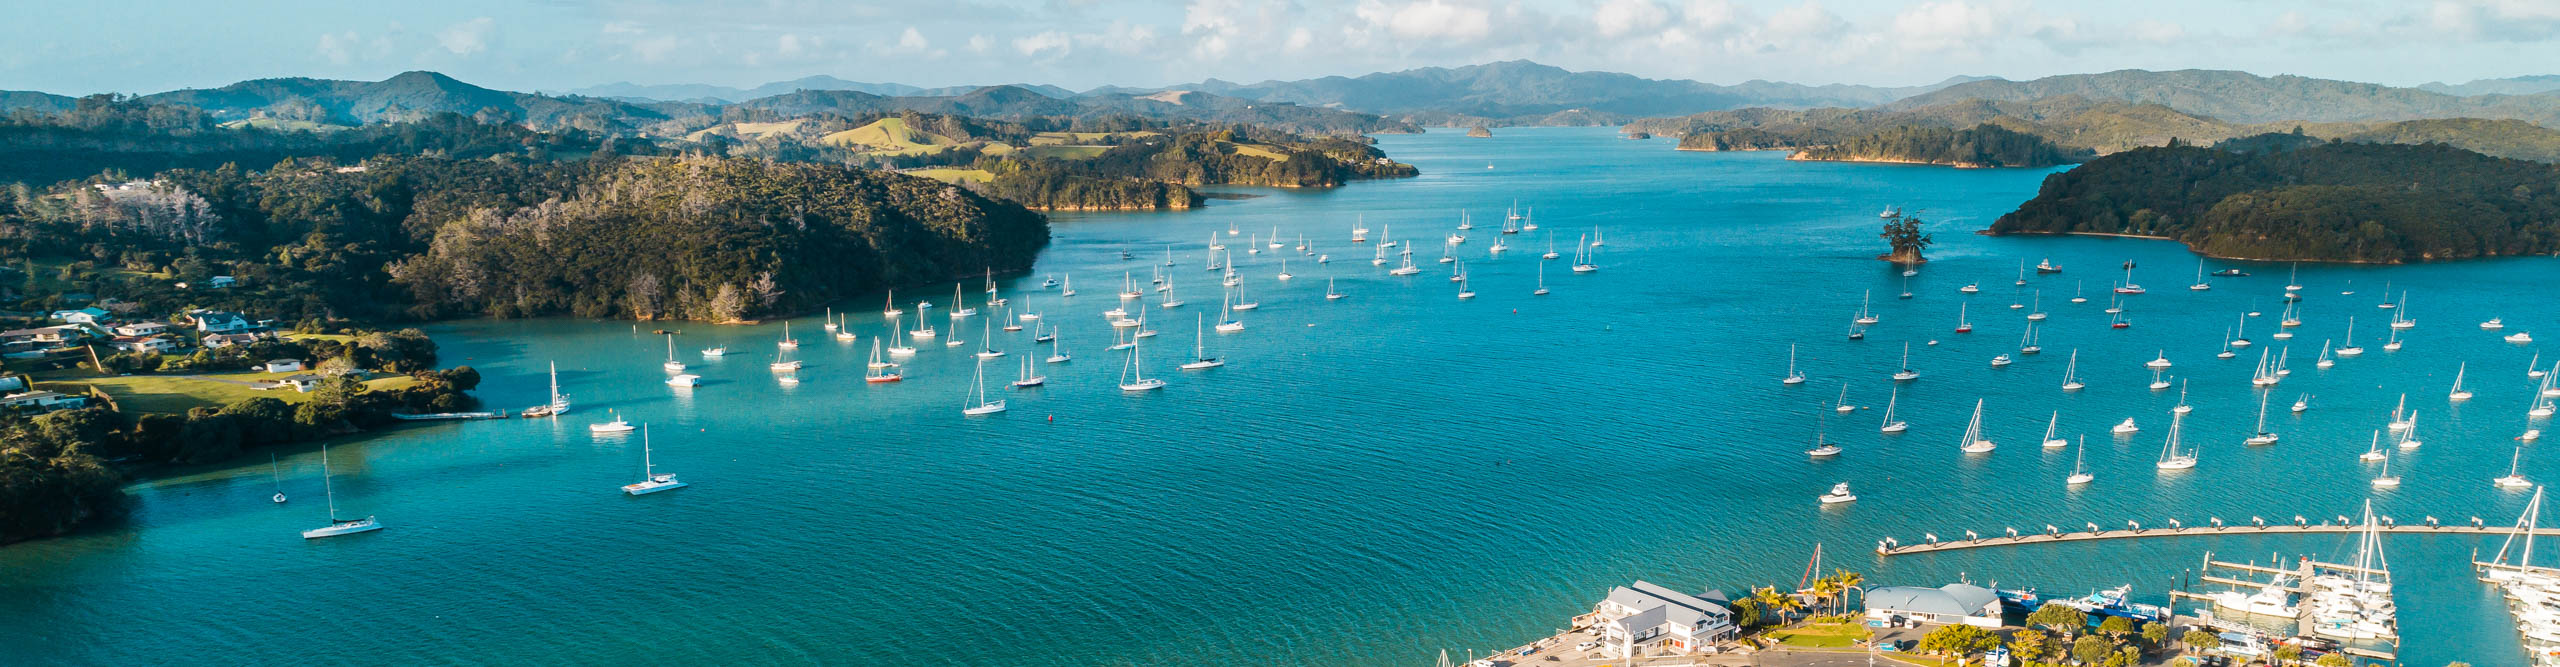 Aerial view of Opua Ferry terminal, with boats and blue sea, Bay of Islands, Northland, New Zealand.